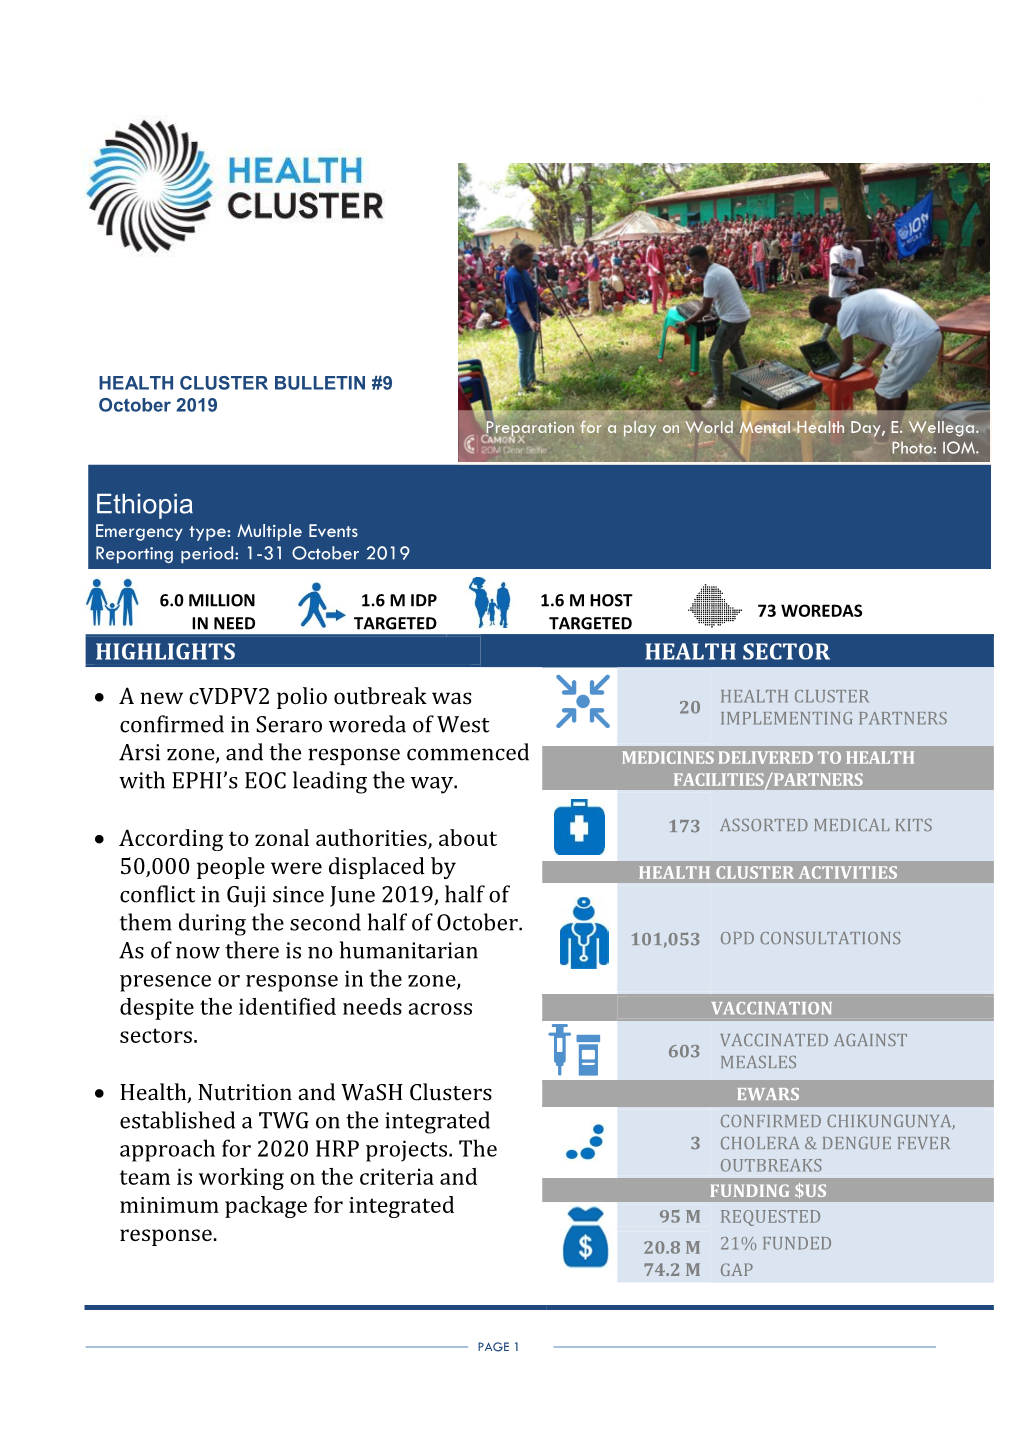 Ethiopia Emergency Type: Multiple Events Reporting Period: 1-31 October 2019